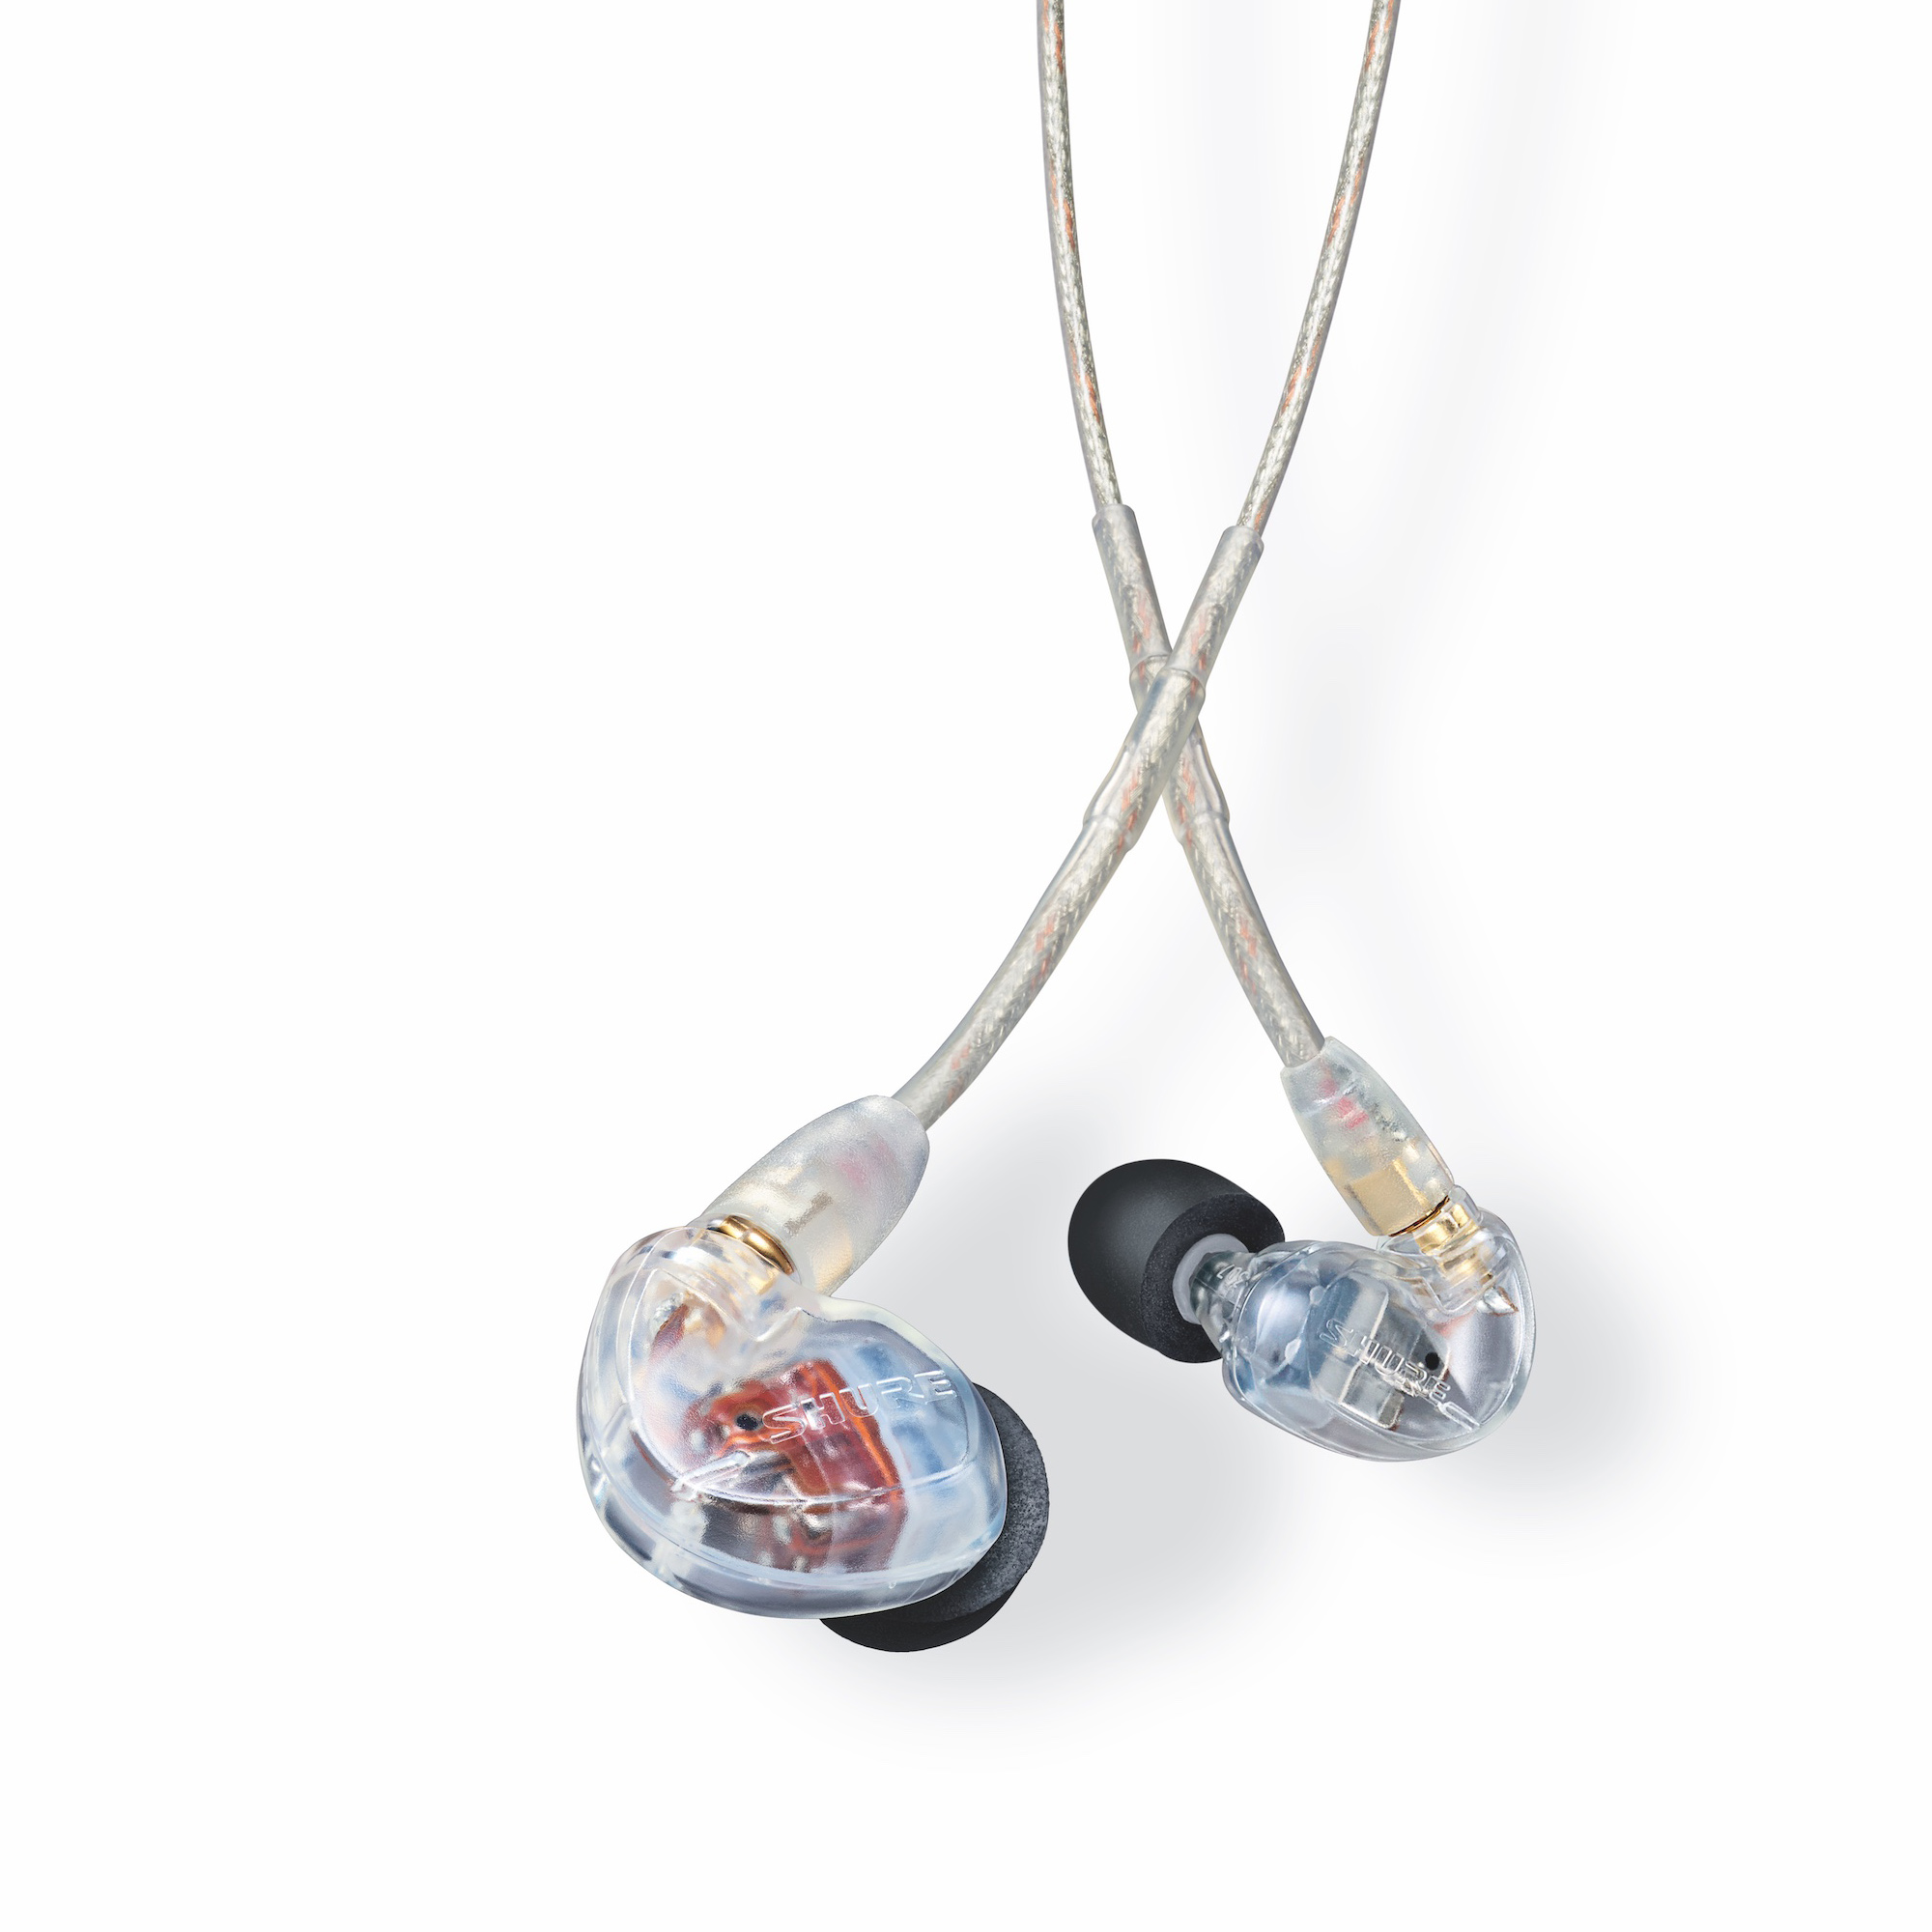 Shure SE535 - Sound Isolating Earphones - Clear | Long & McQuade